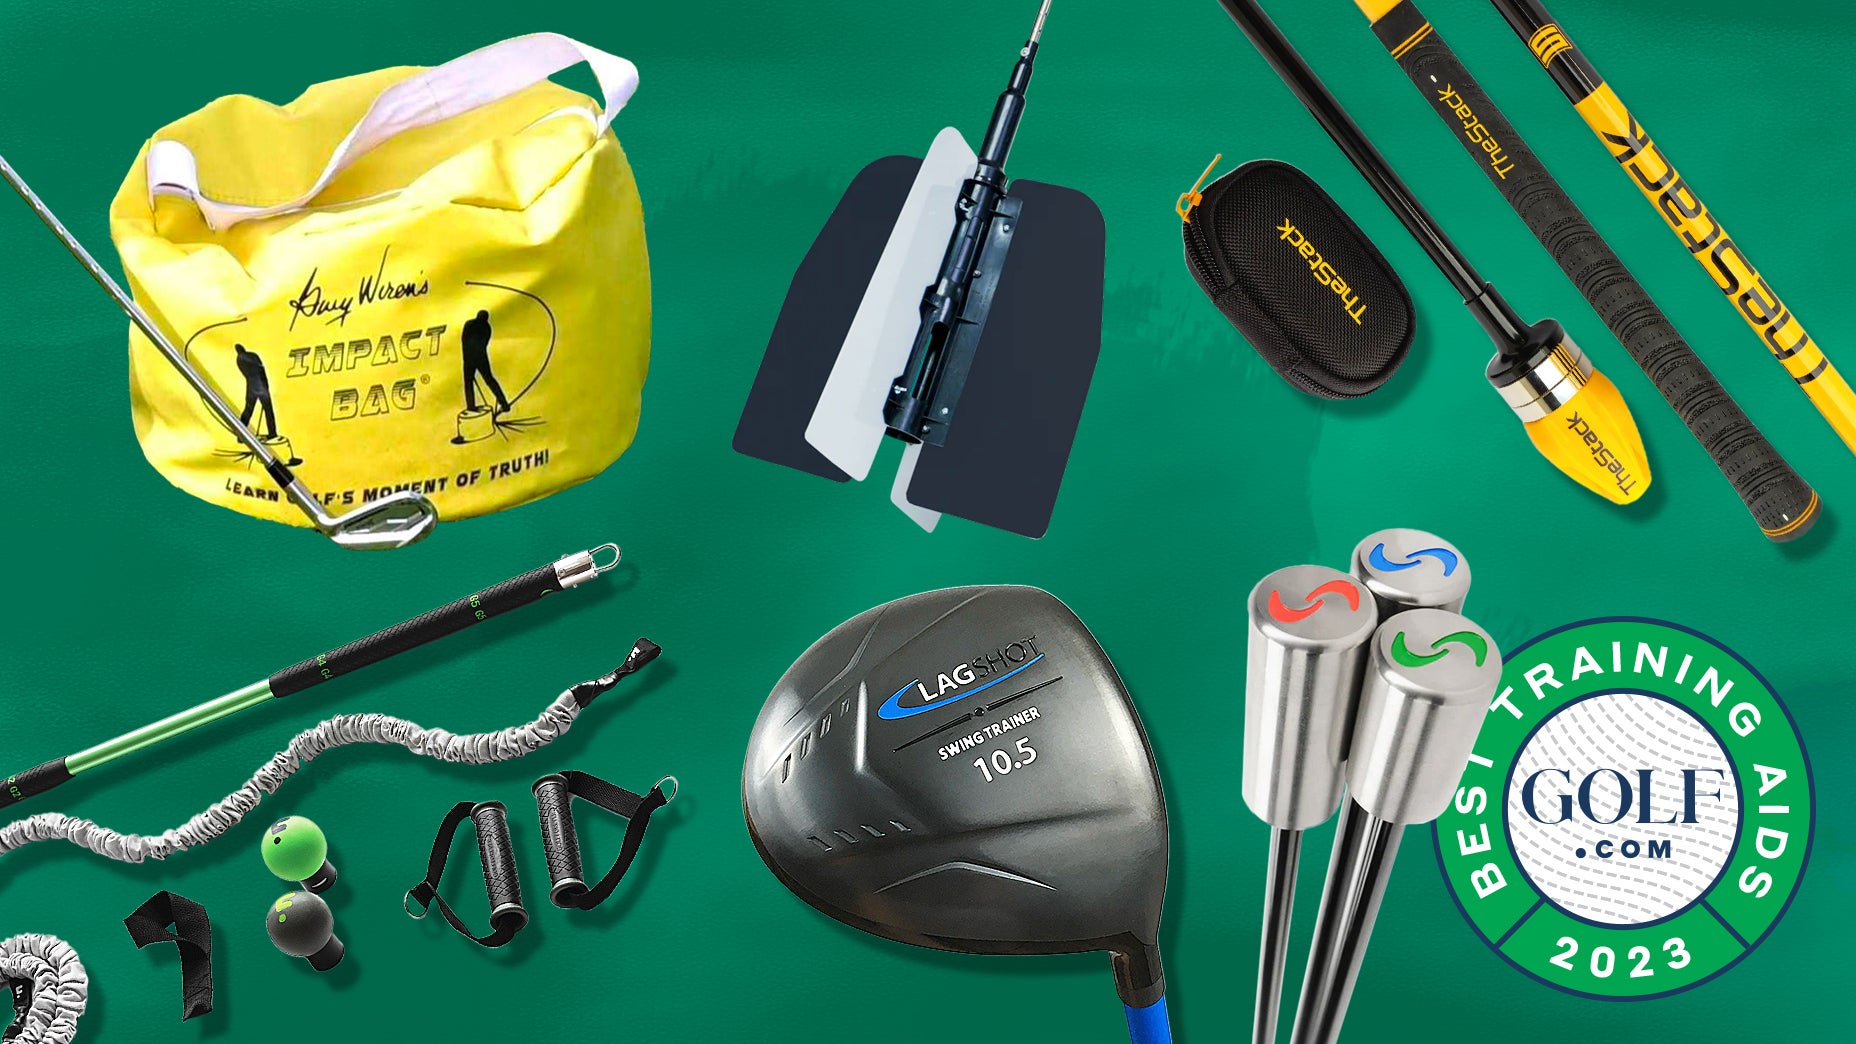 Elevate your game with the best golf accessories